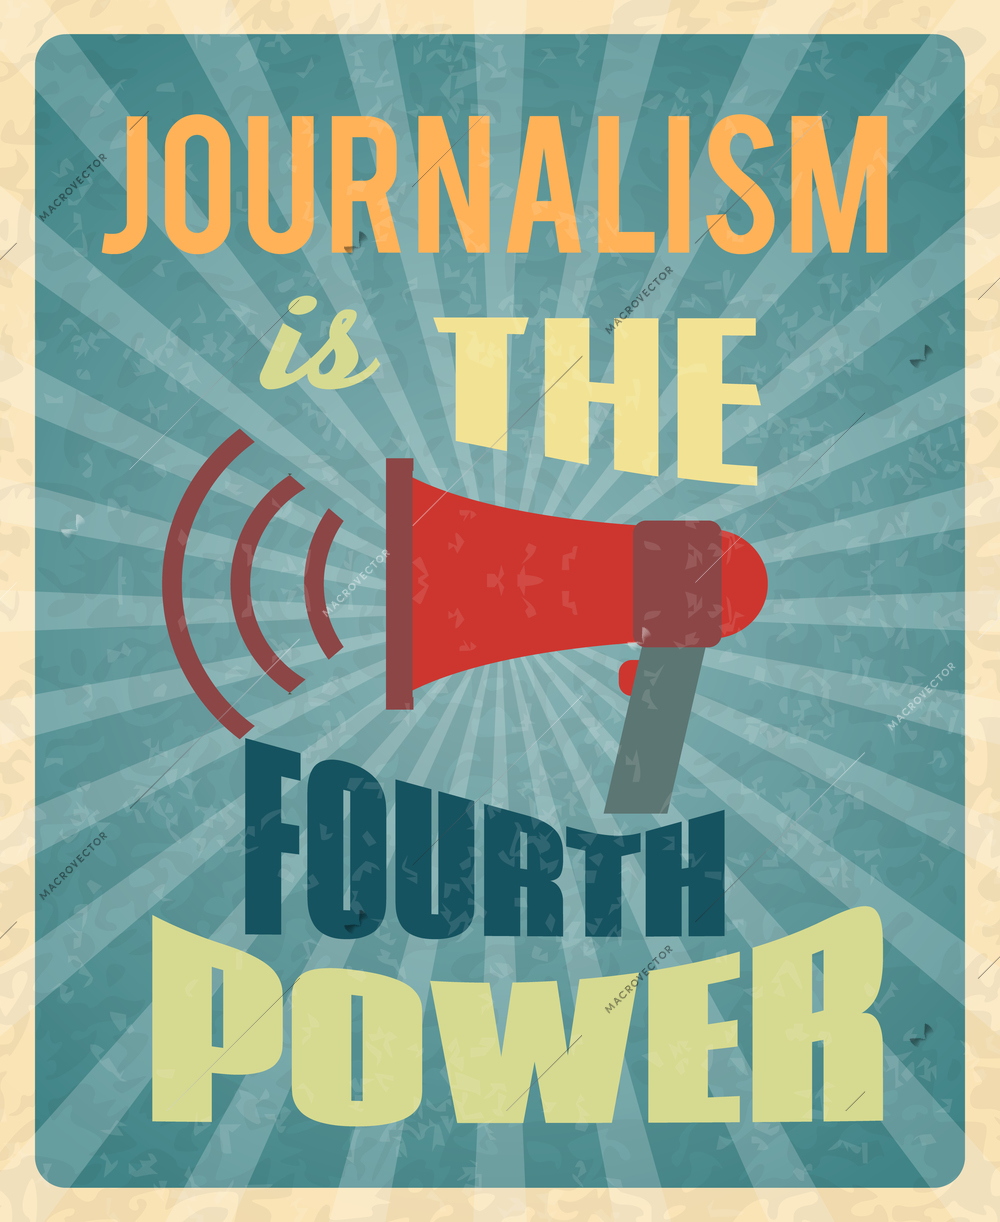 Journalism press news reporter profession poster with red megaphone and text vector illustration